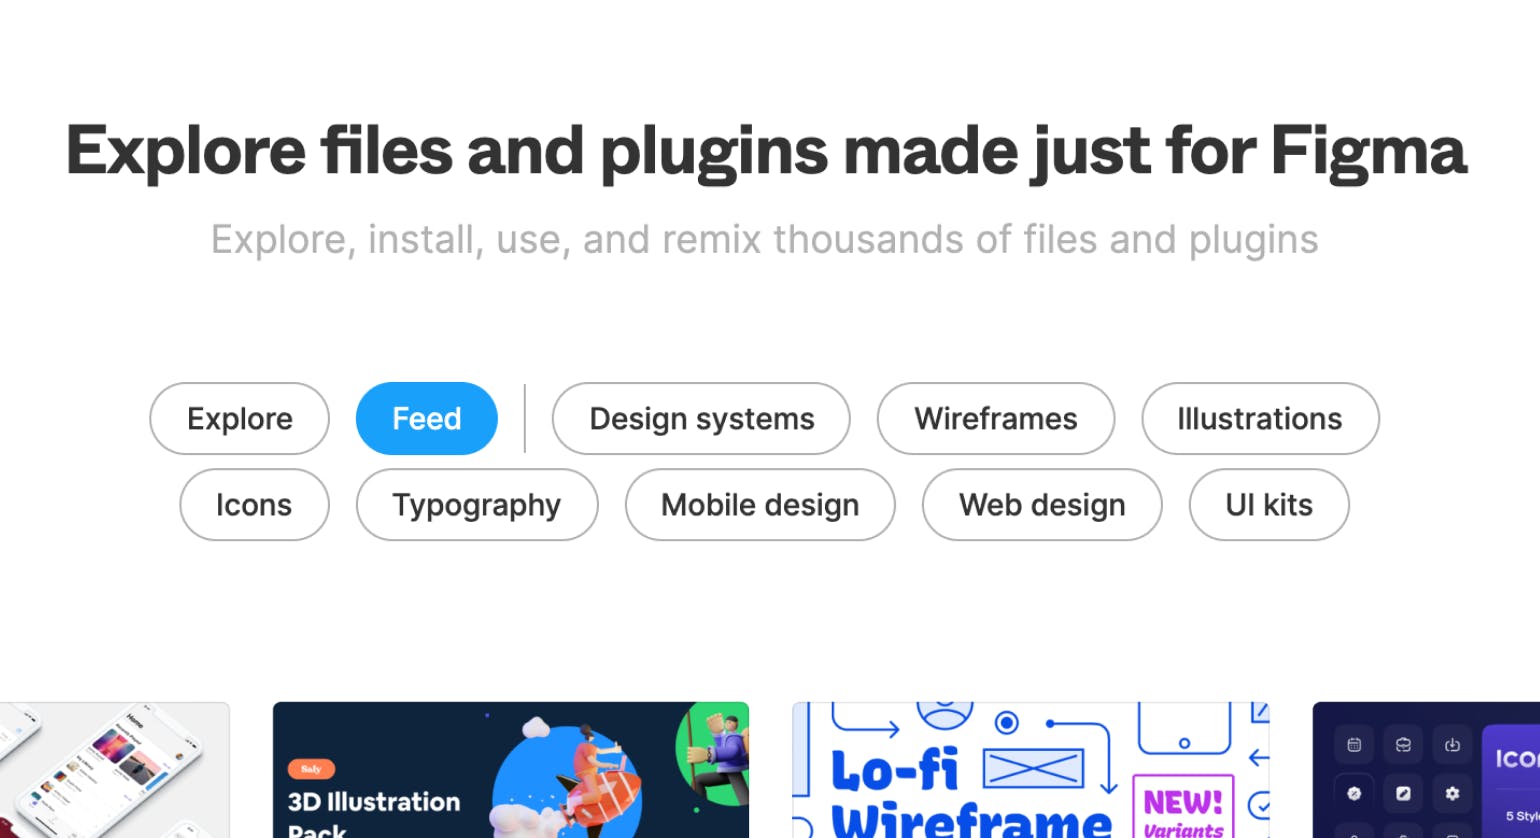 Figma's community helps designers leverage work and create beautiful designs